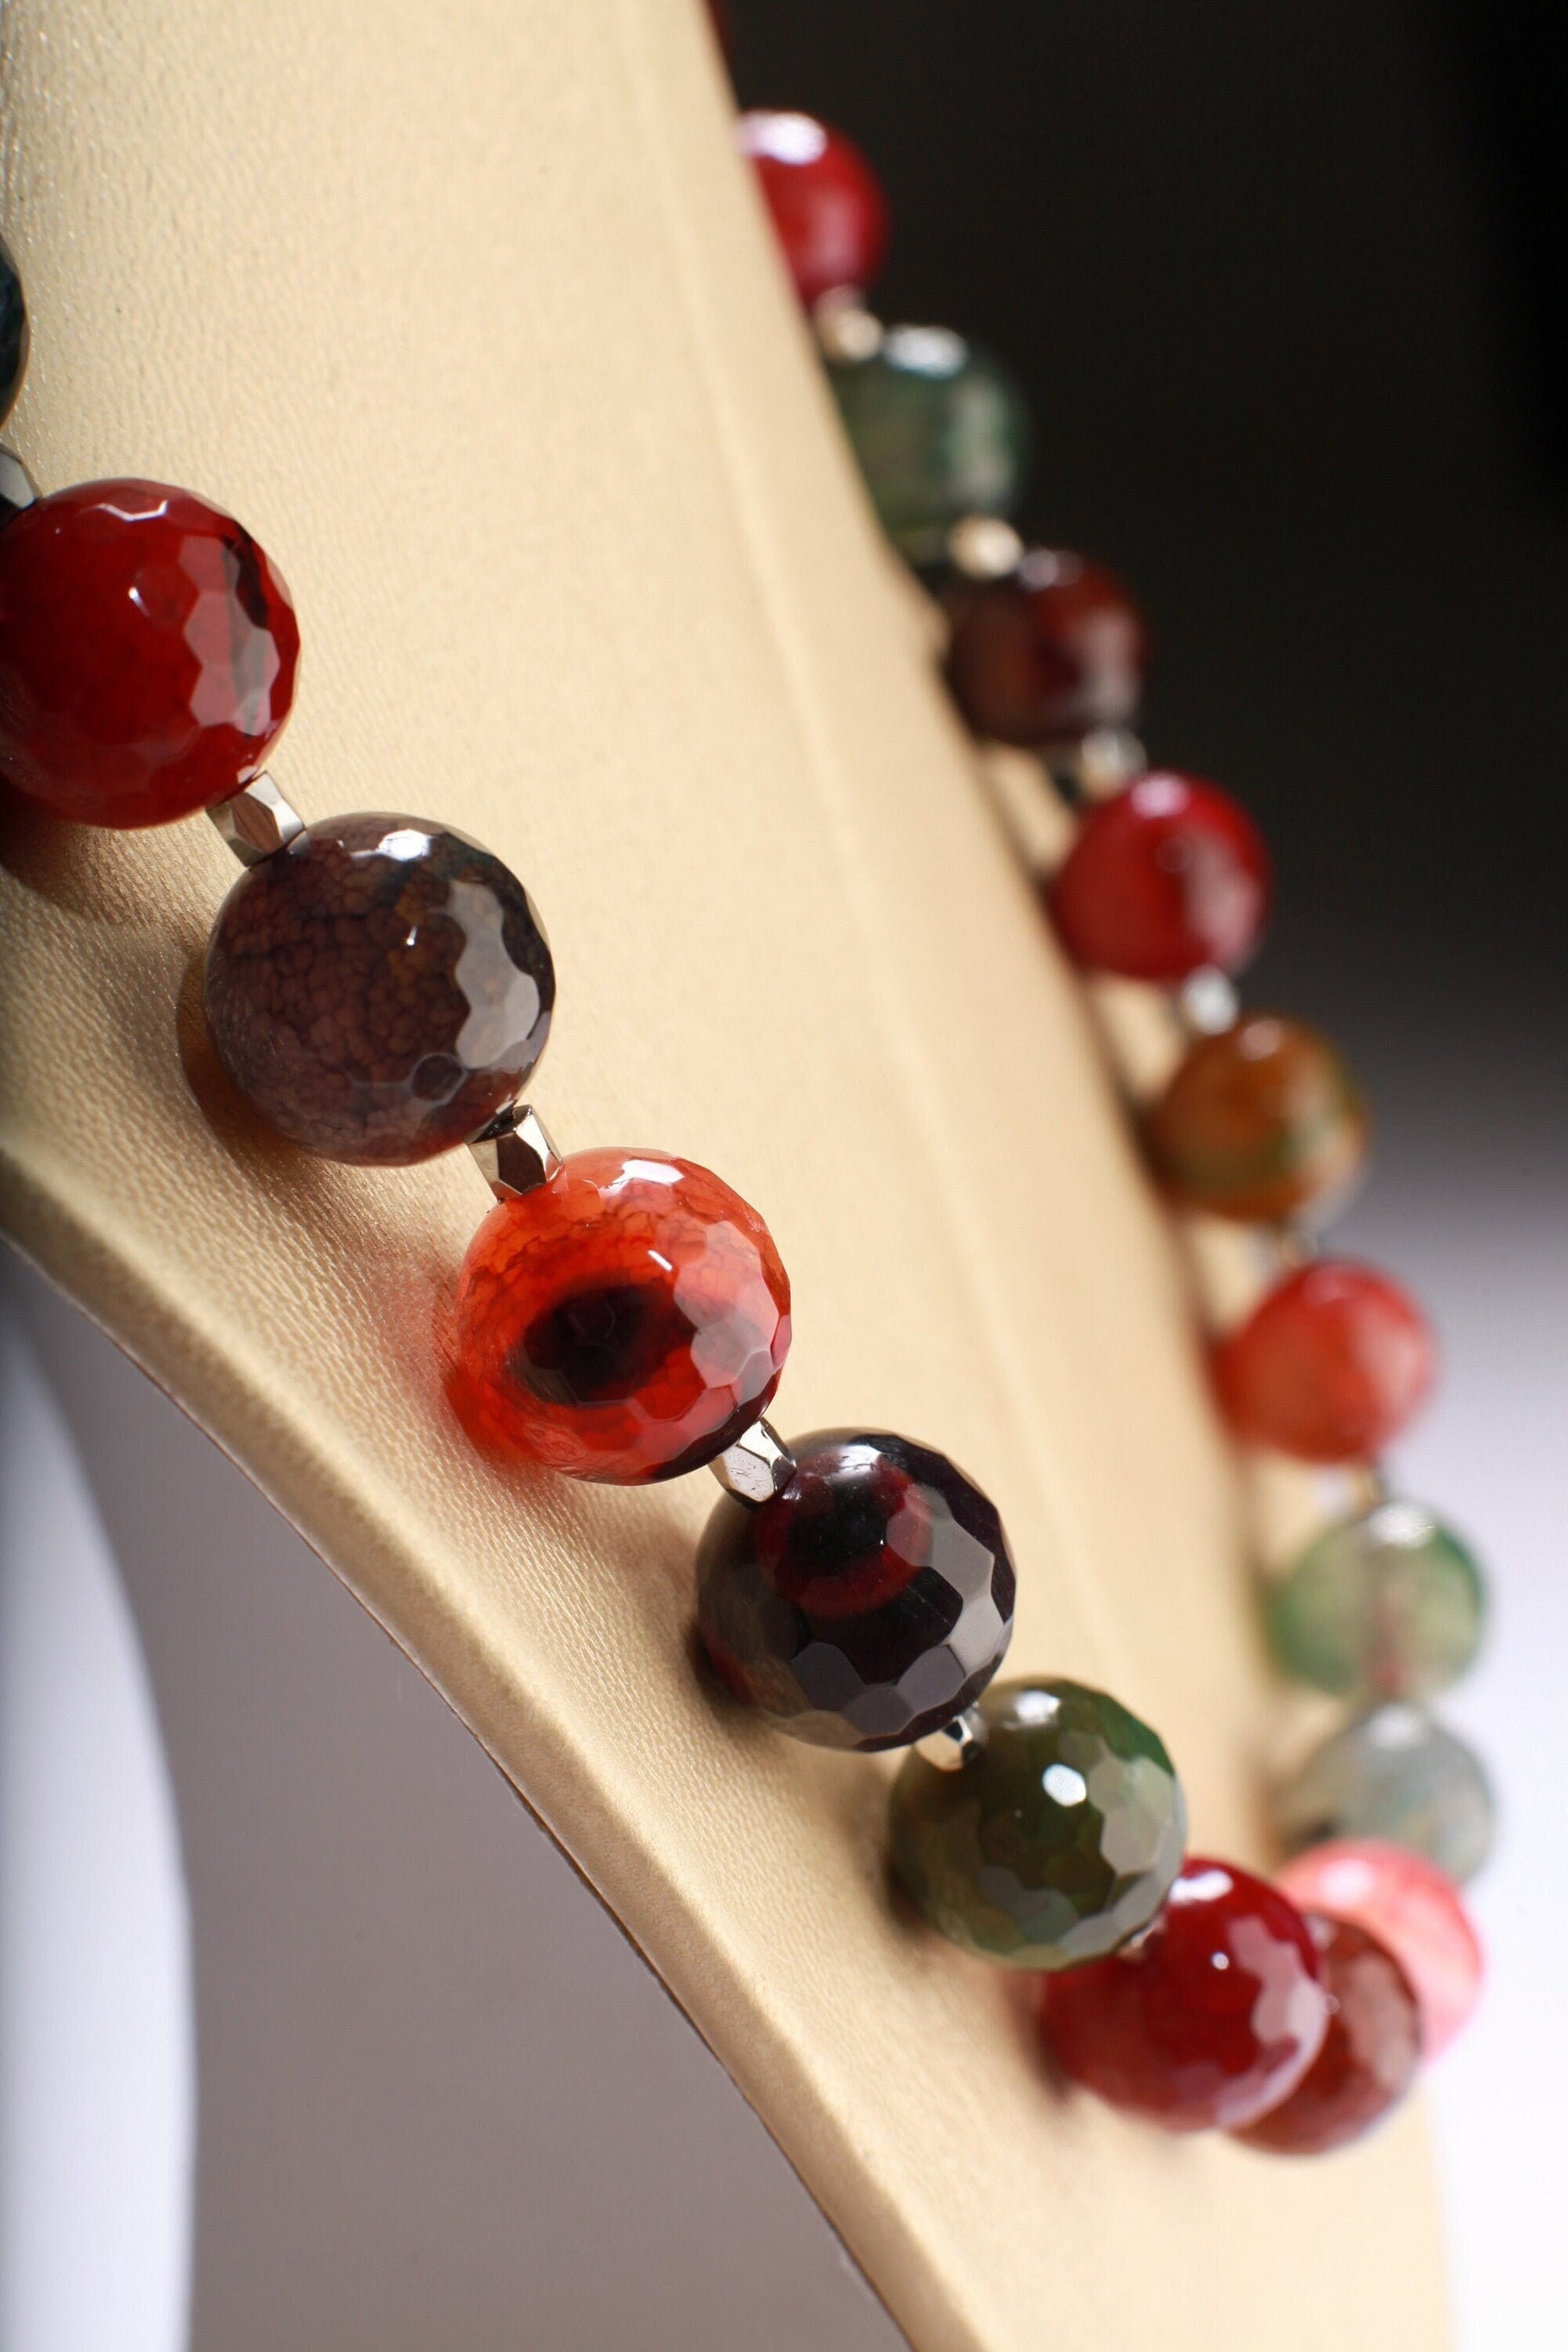 Faceted Fire Agate Natural Multi color 14mm Round Bead 20&quot; Gemstones Necklace plus 2”Extension Chain